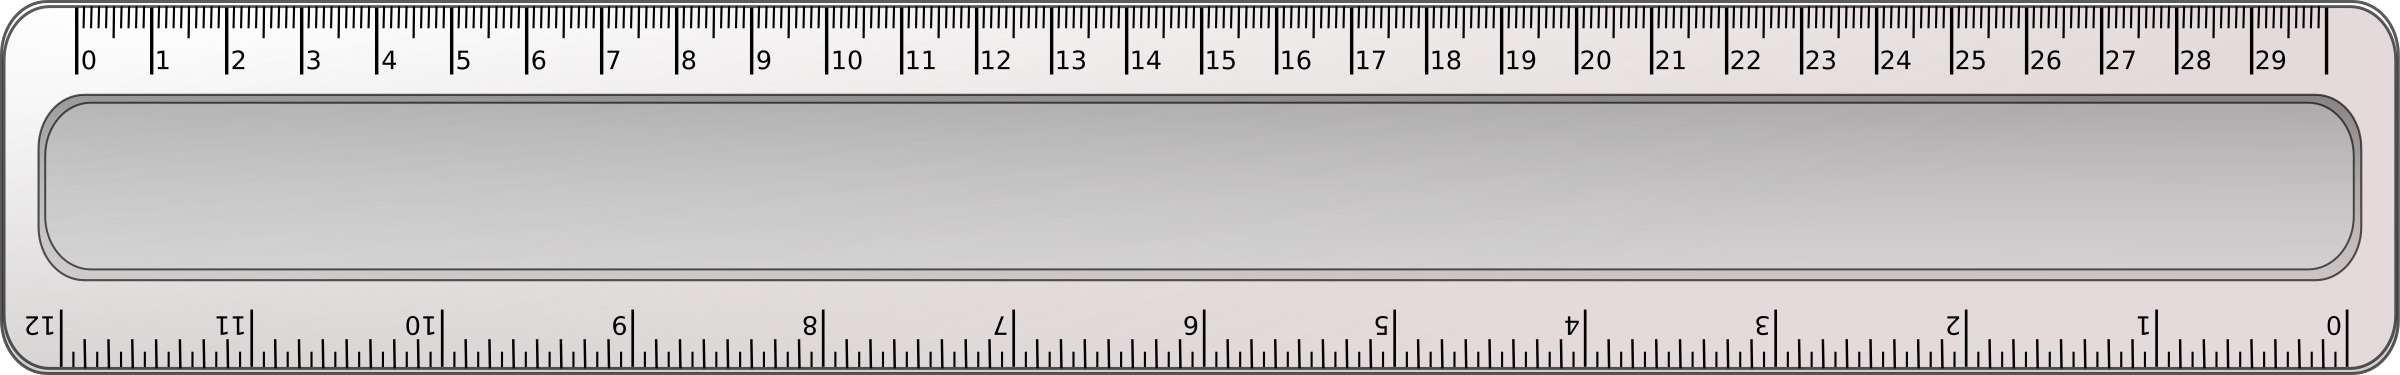 ruler clipart png - photo #47